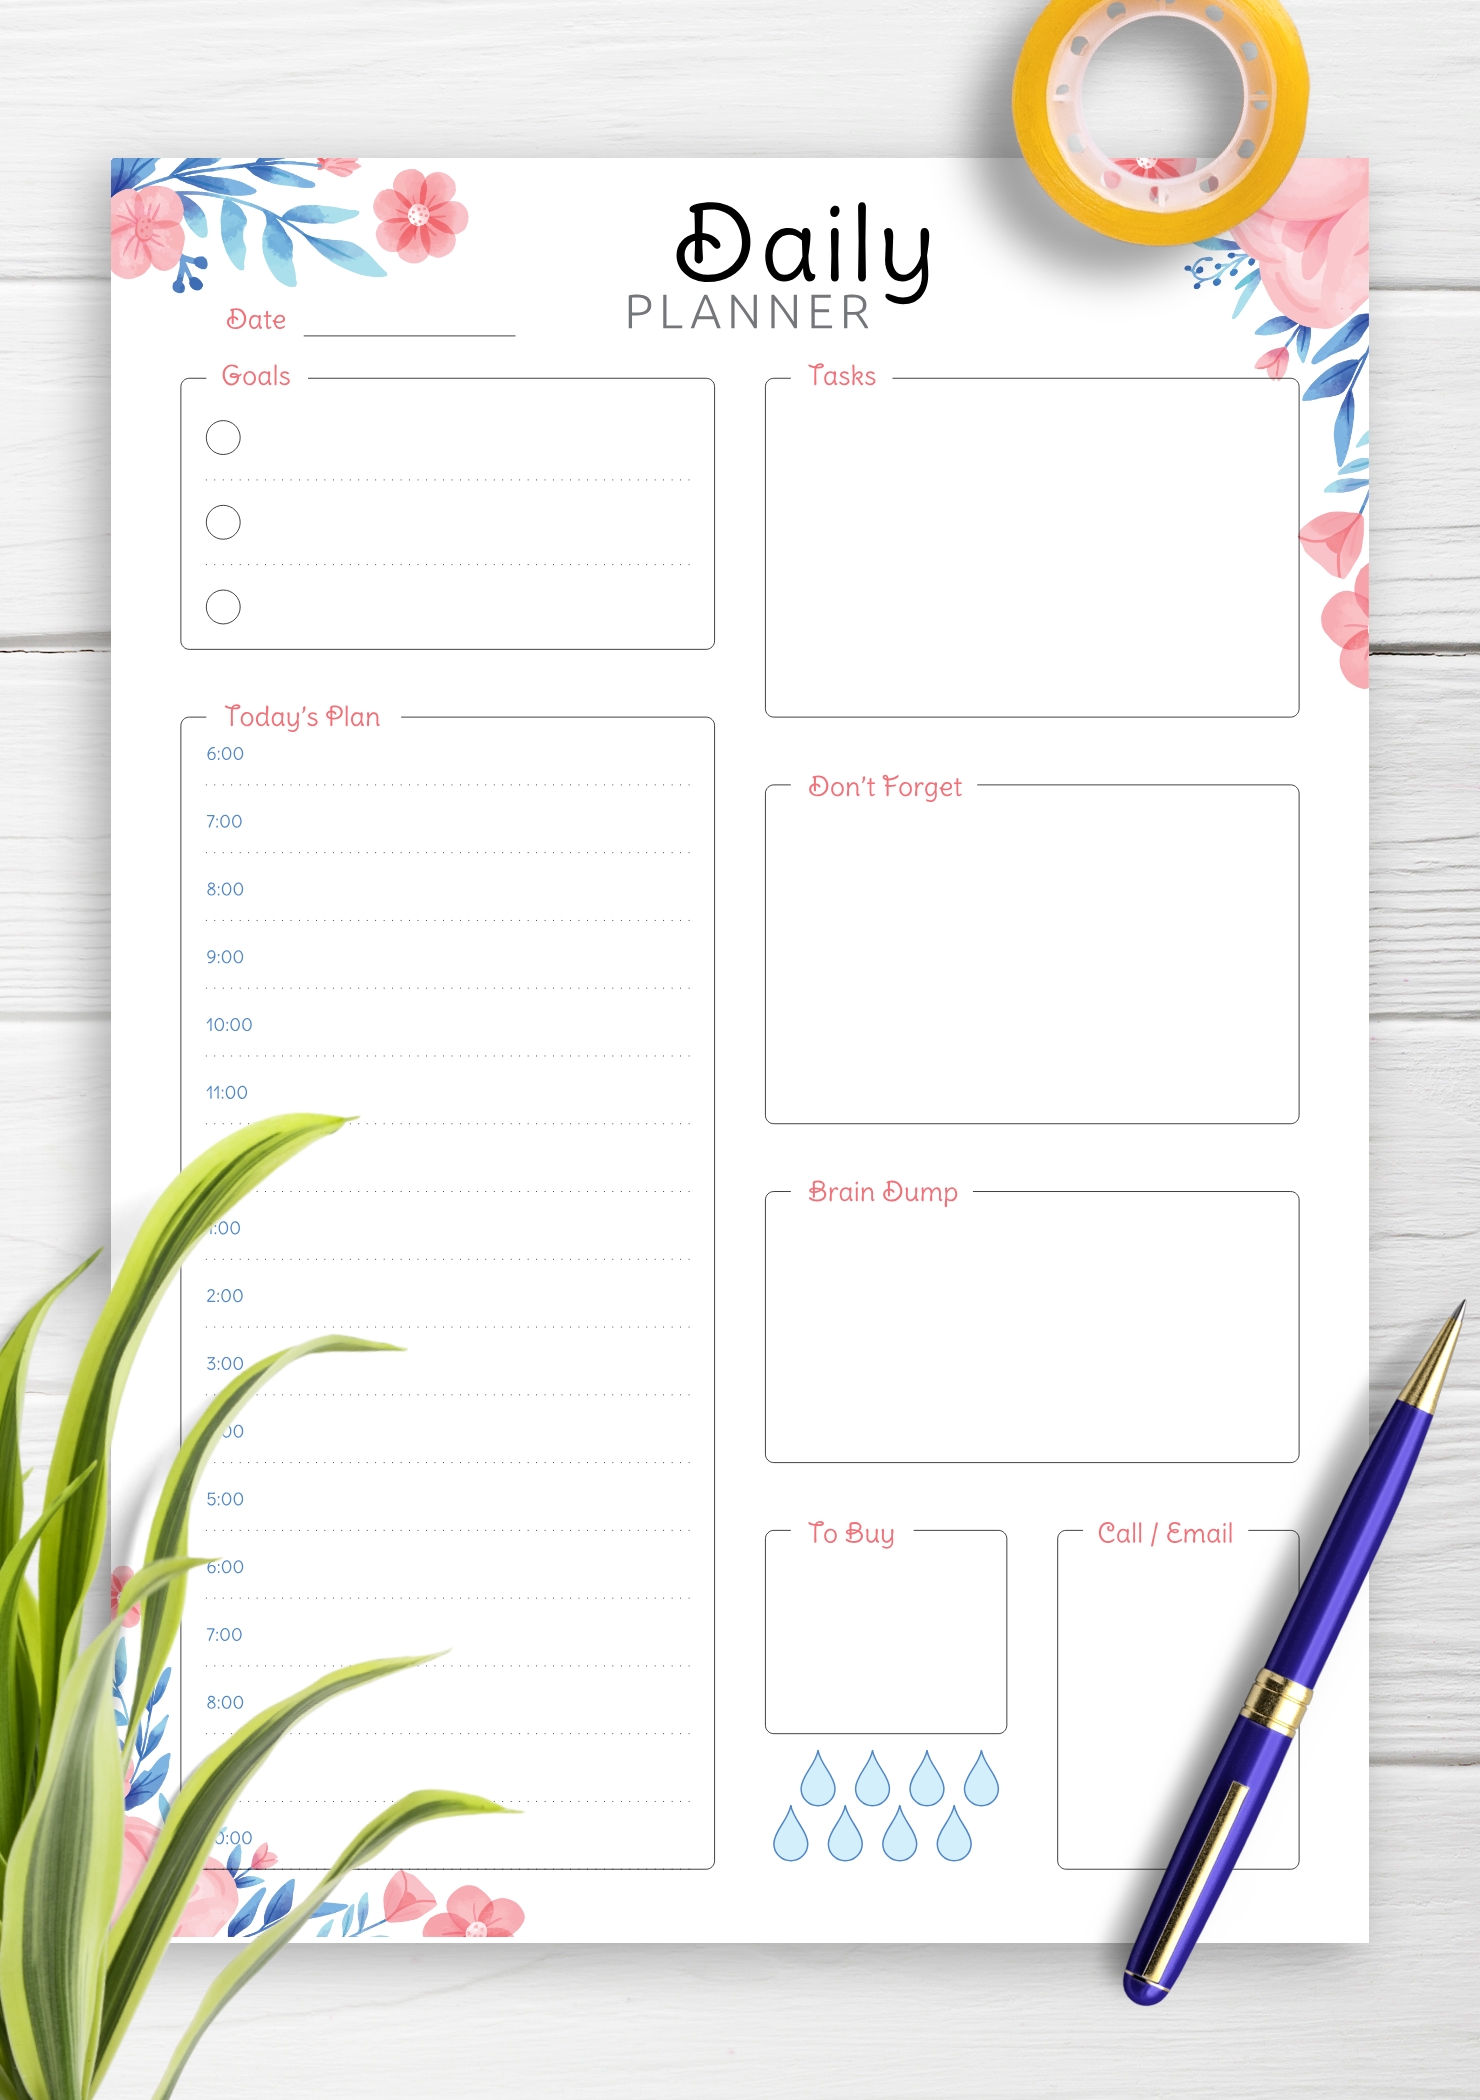 tasks by planner and to do logo